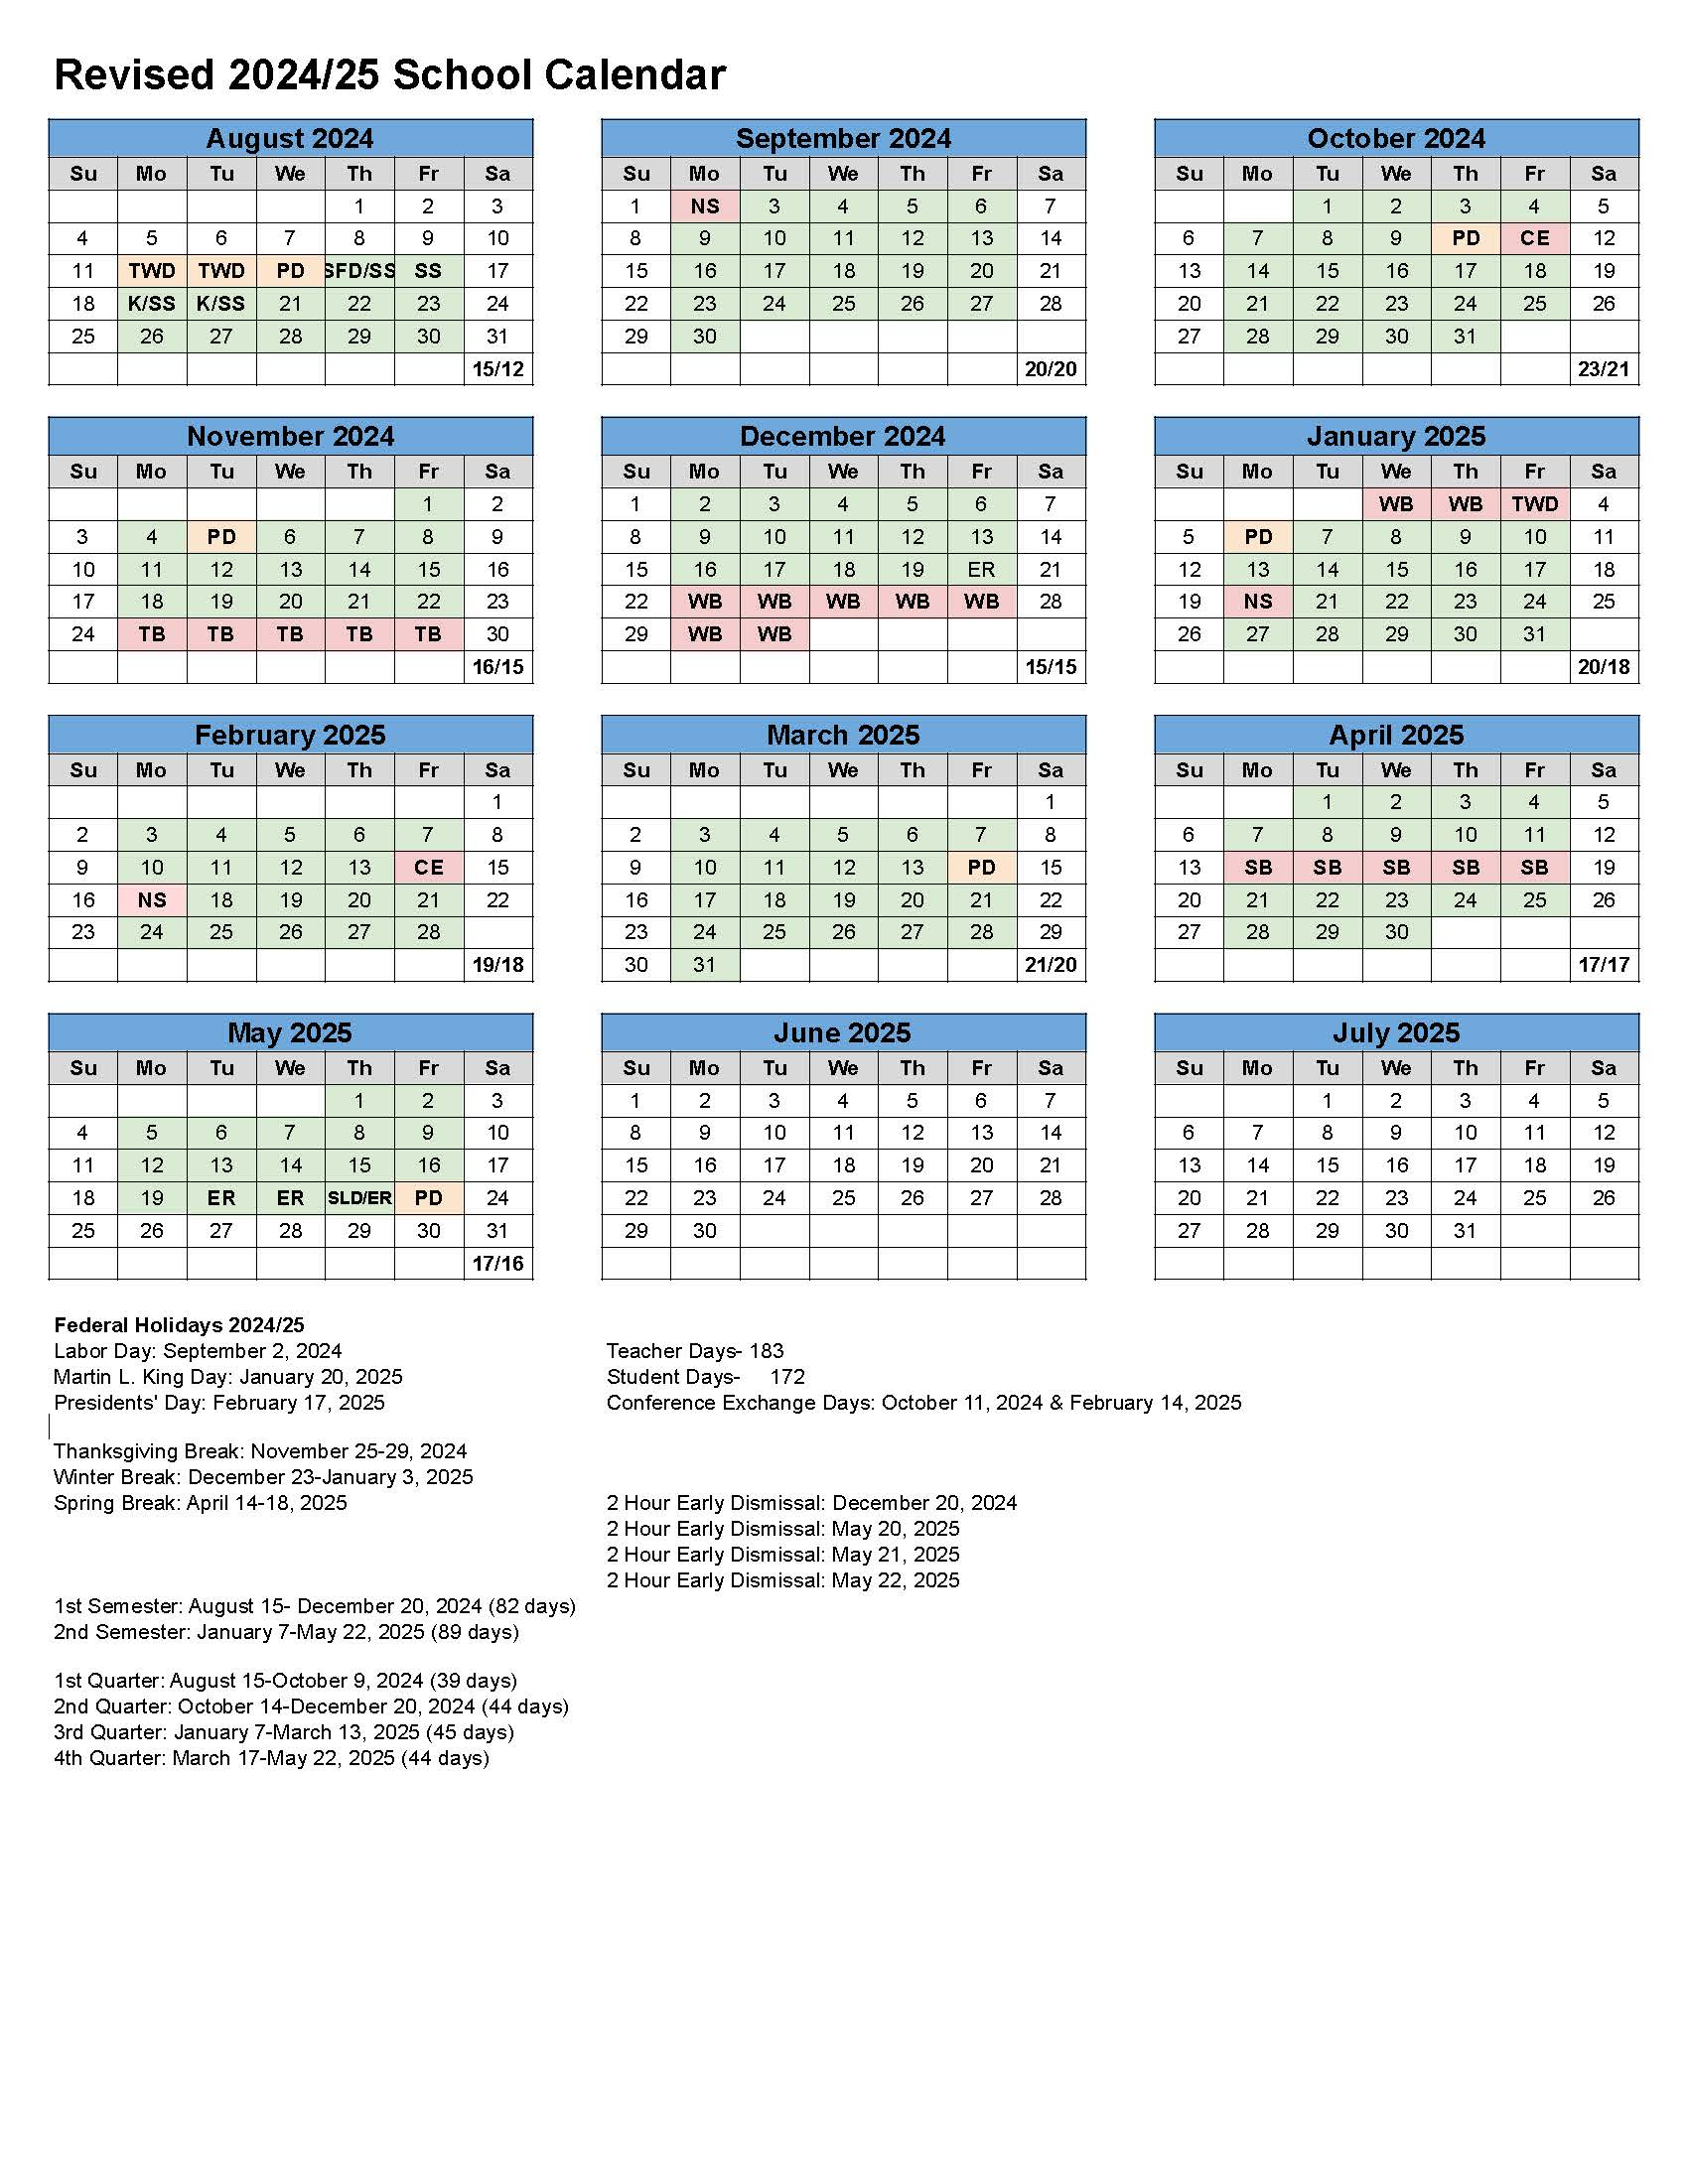 copy of calendar dates with details listed on the links above for 23-24